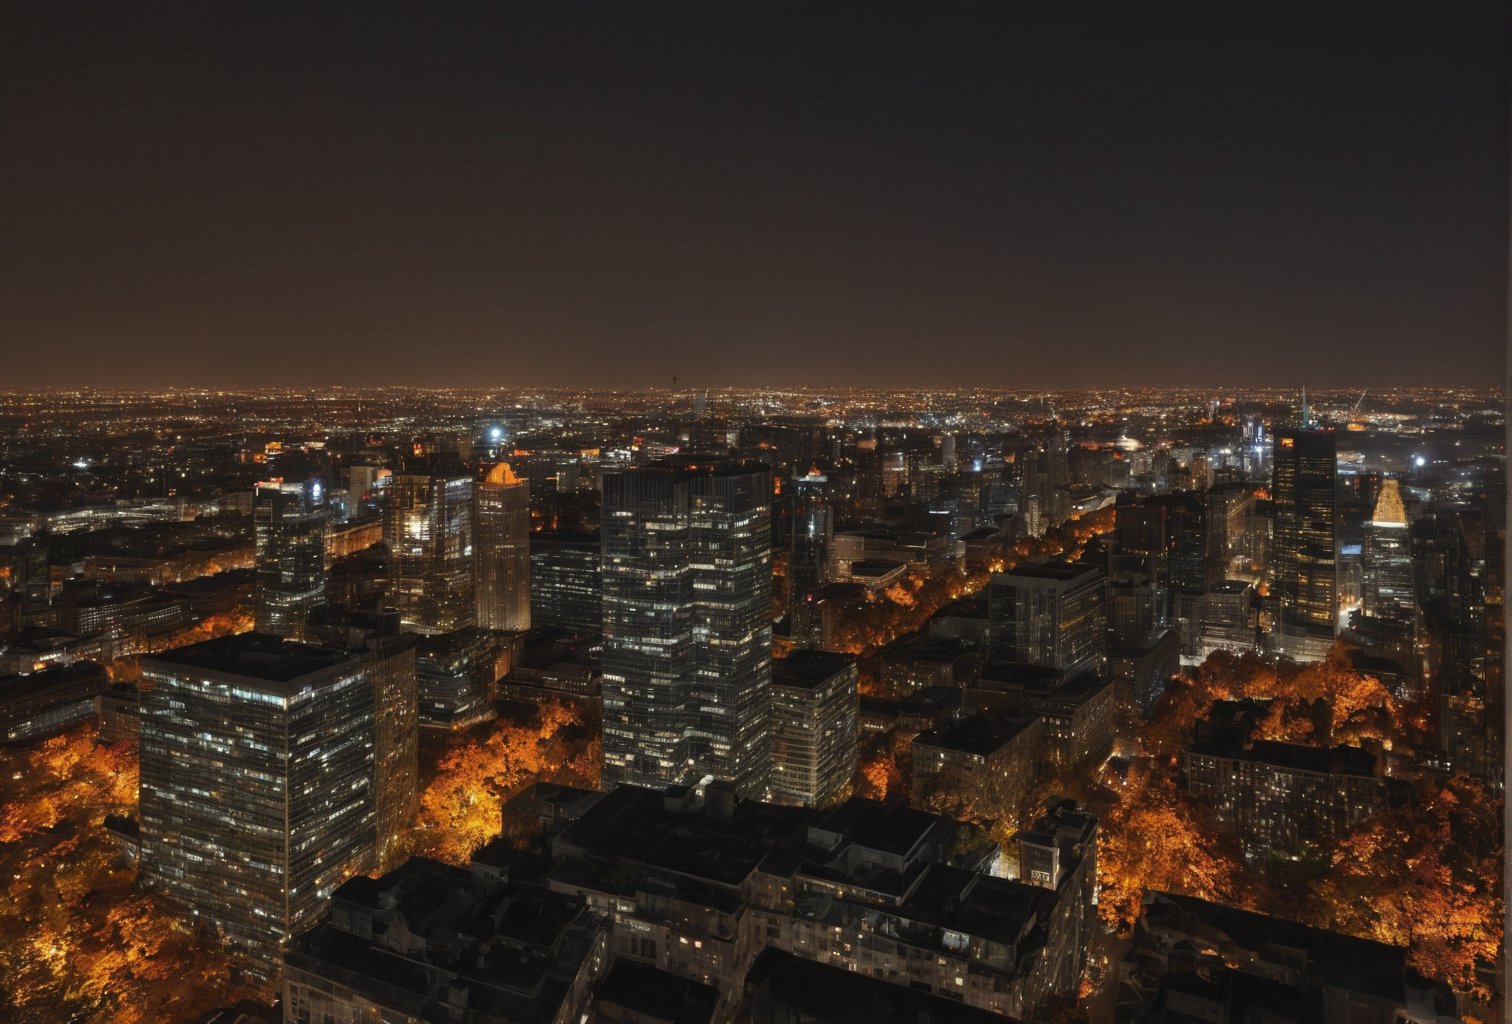 Night, autumn, view from the roof of a skyscraper, skyscrapers with orange windows, lanterns illuminate the foliage of trees and are reflected in the glass of skyscrapers